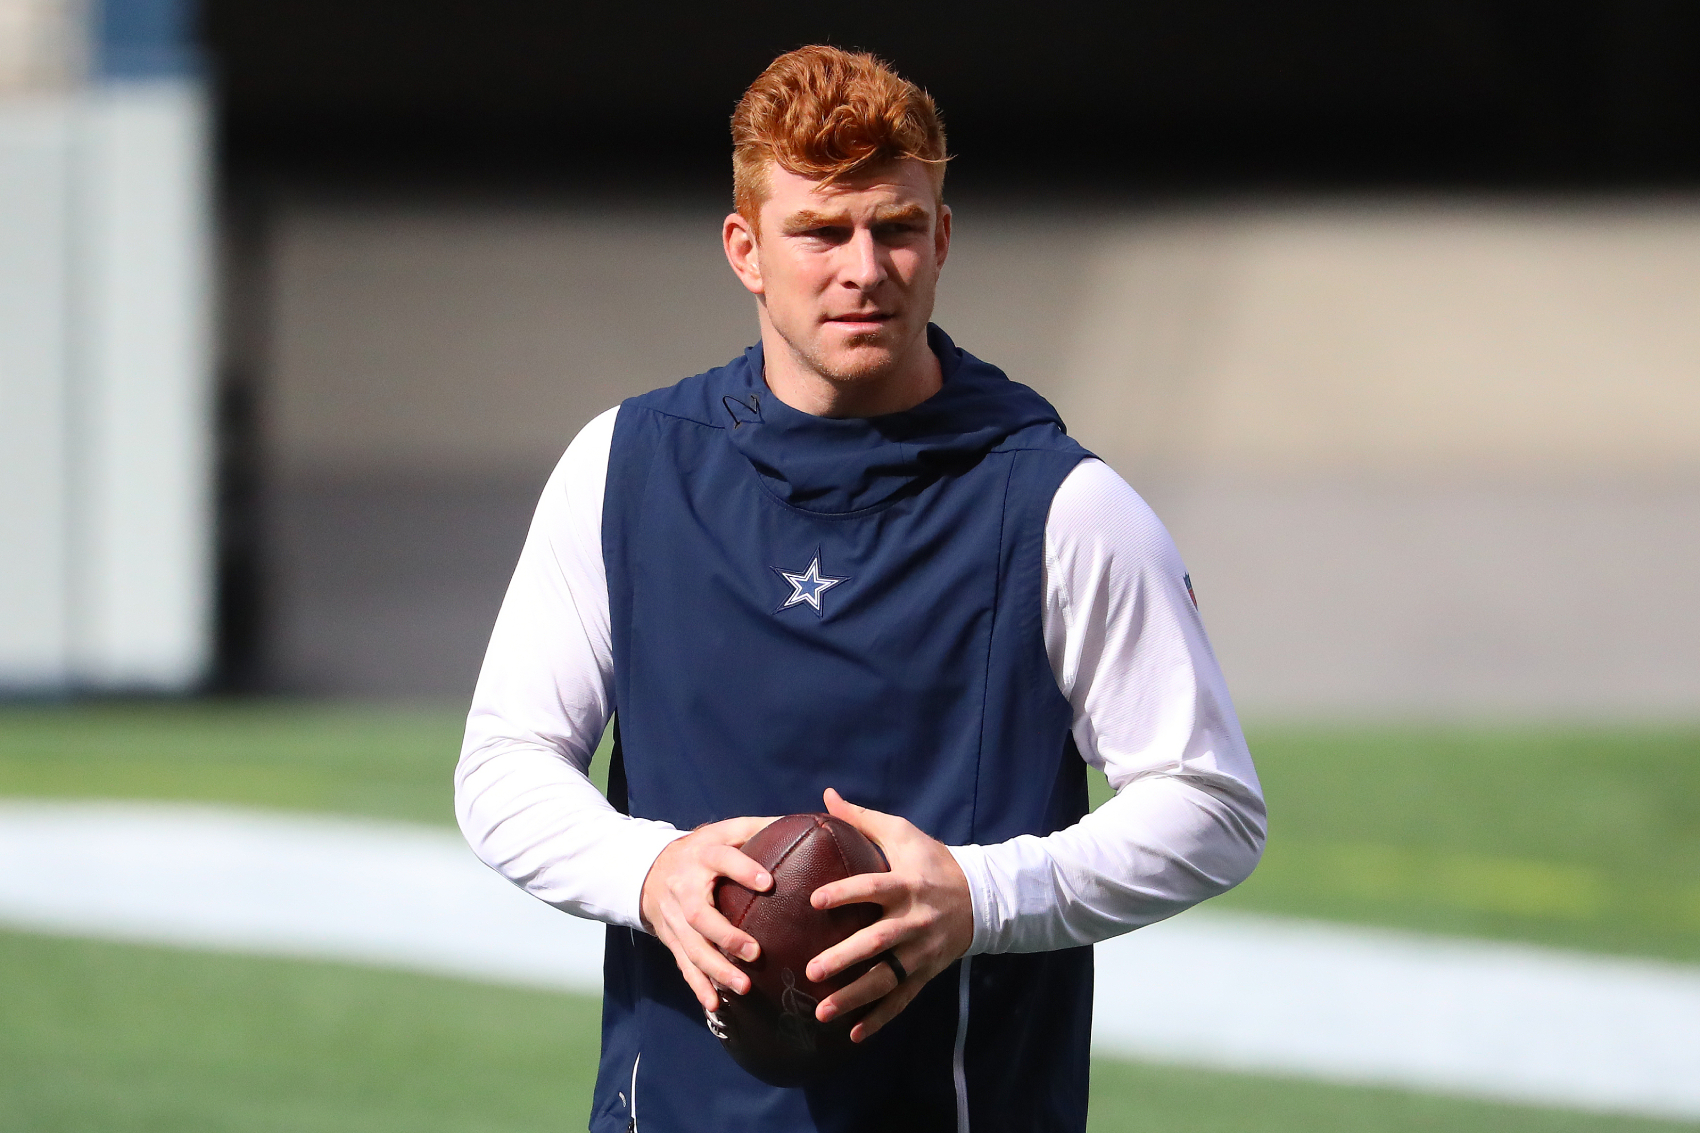 Andy Dalton is now the starting quarterback for the Dallas Cowboys. So, was Dalton any good in his career before signing with the Cowboys?